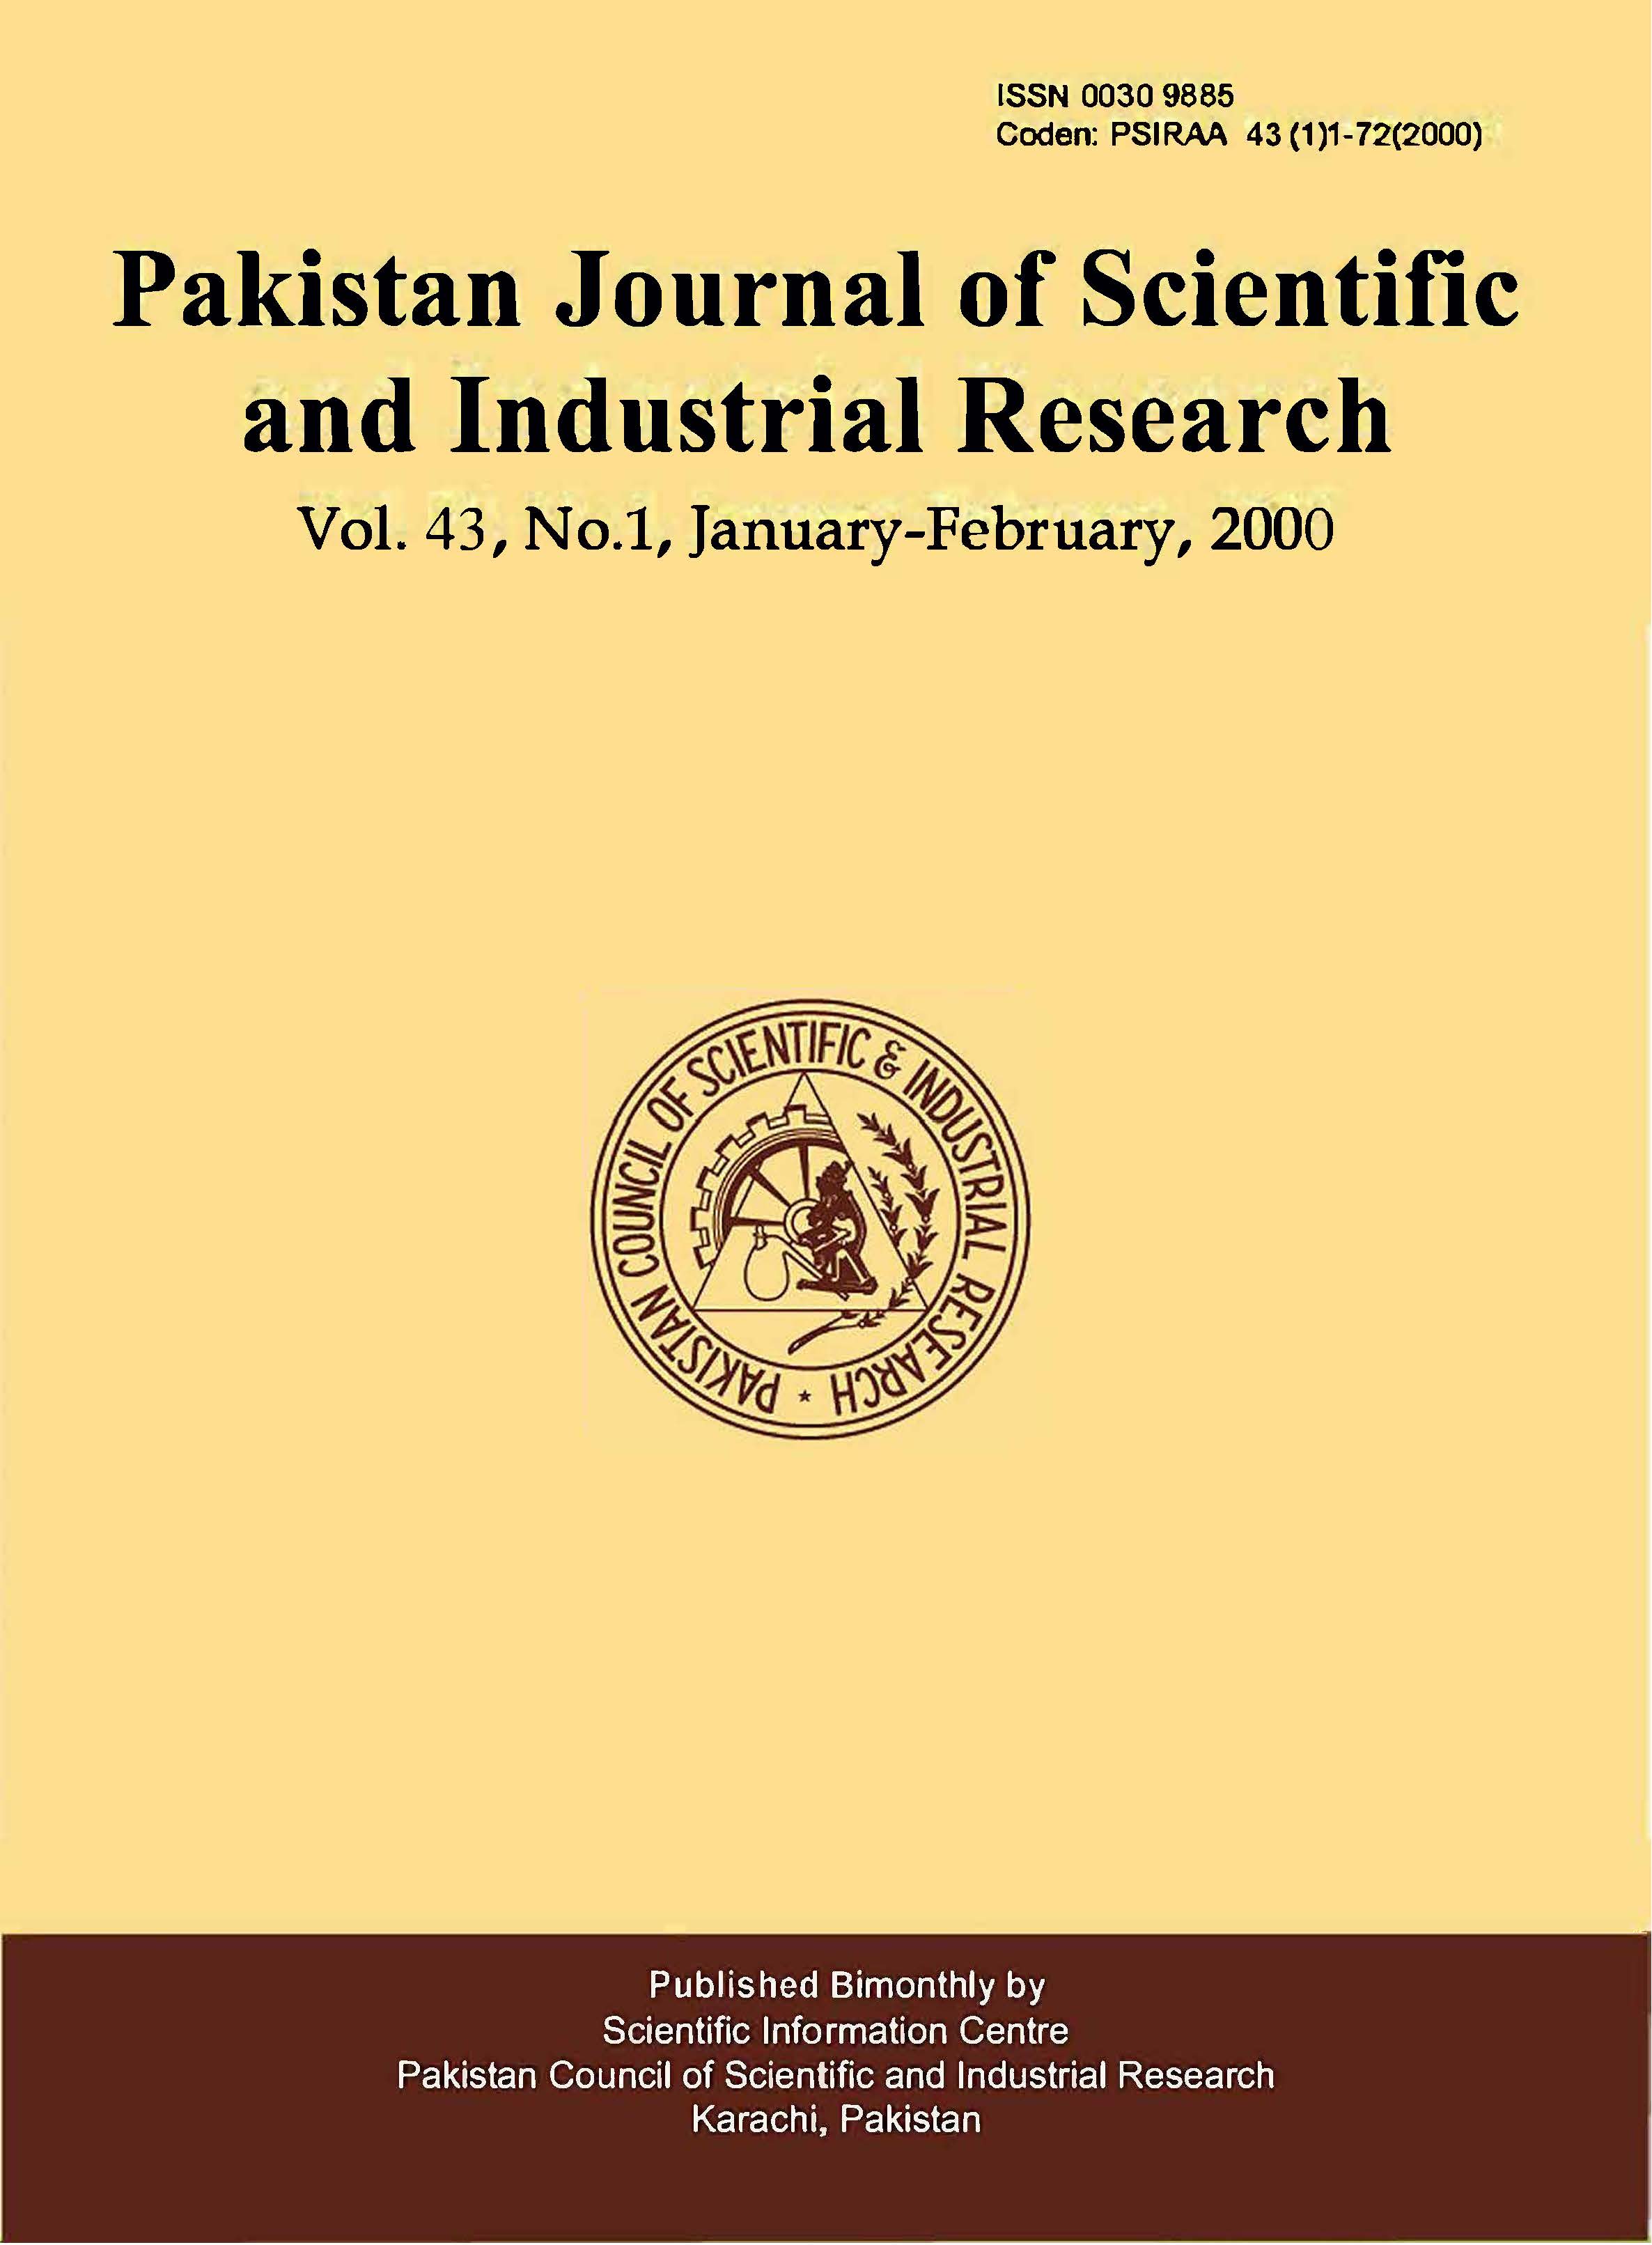 					View Vol. 43 No. 1 (2000): Pakistan Journal of Scientific and Industrial Research
				